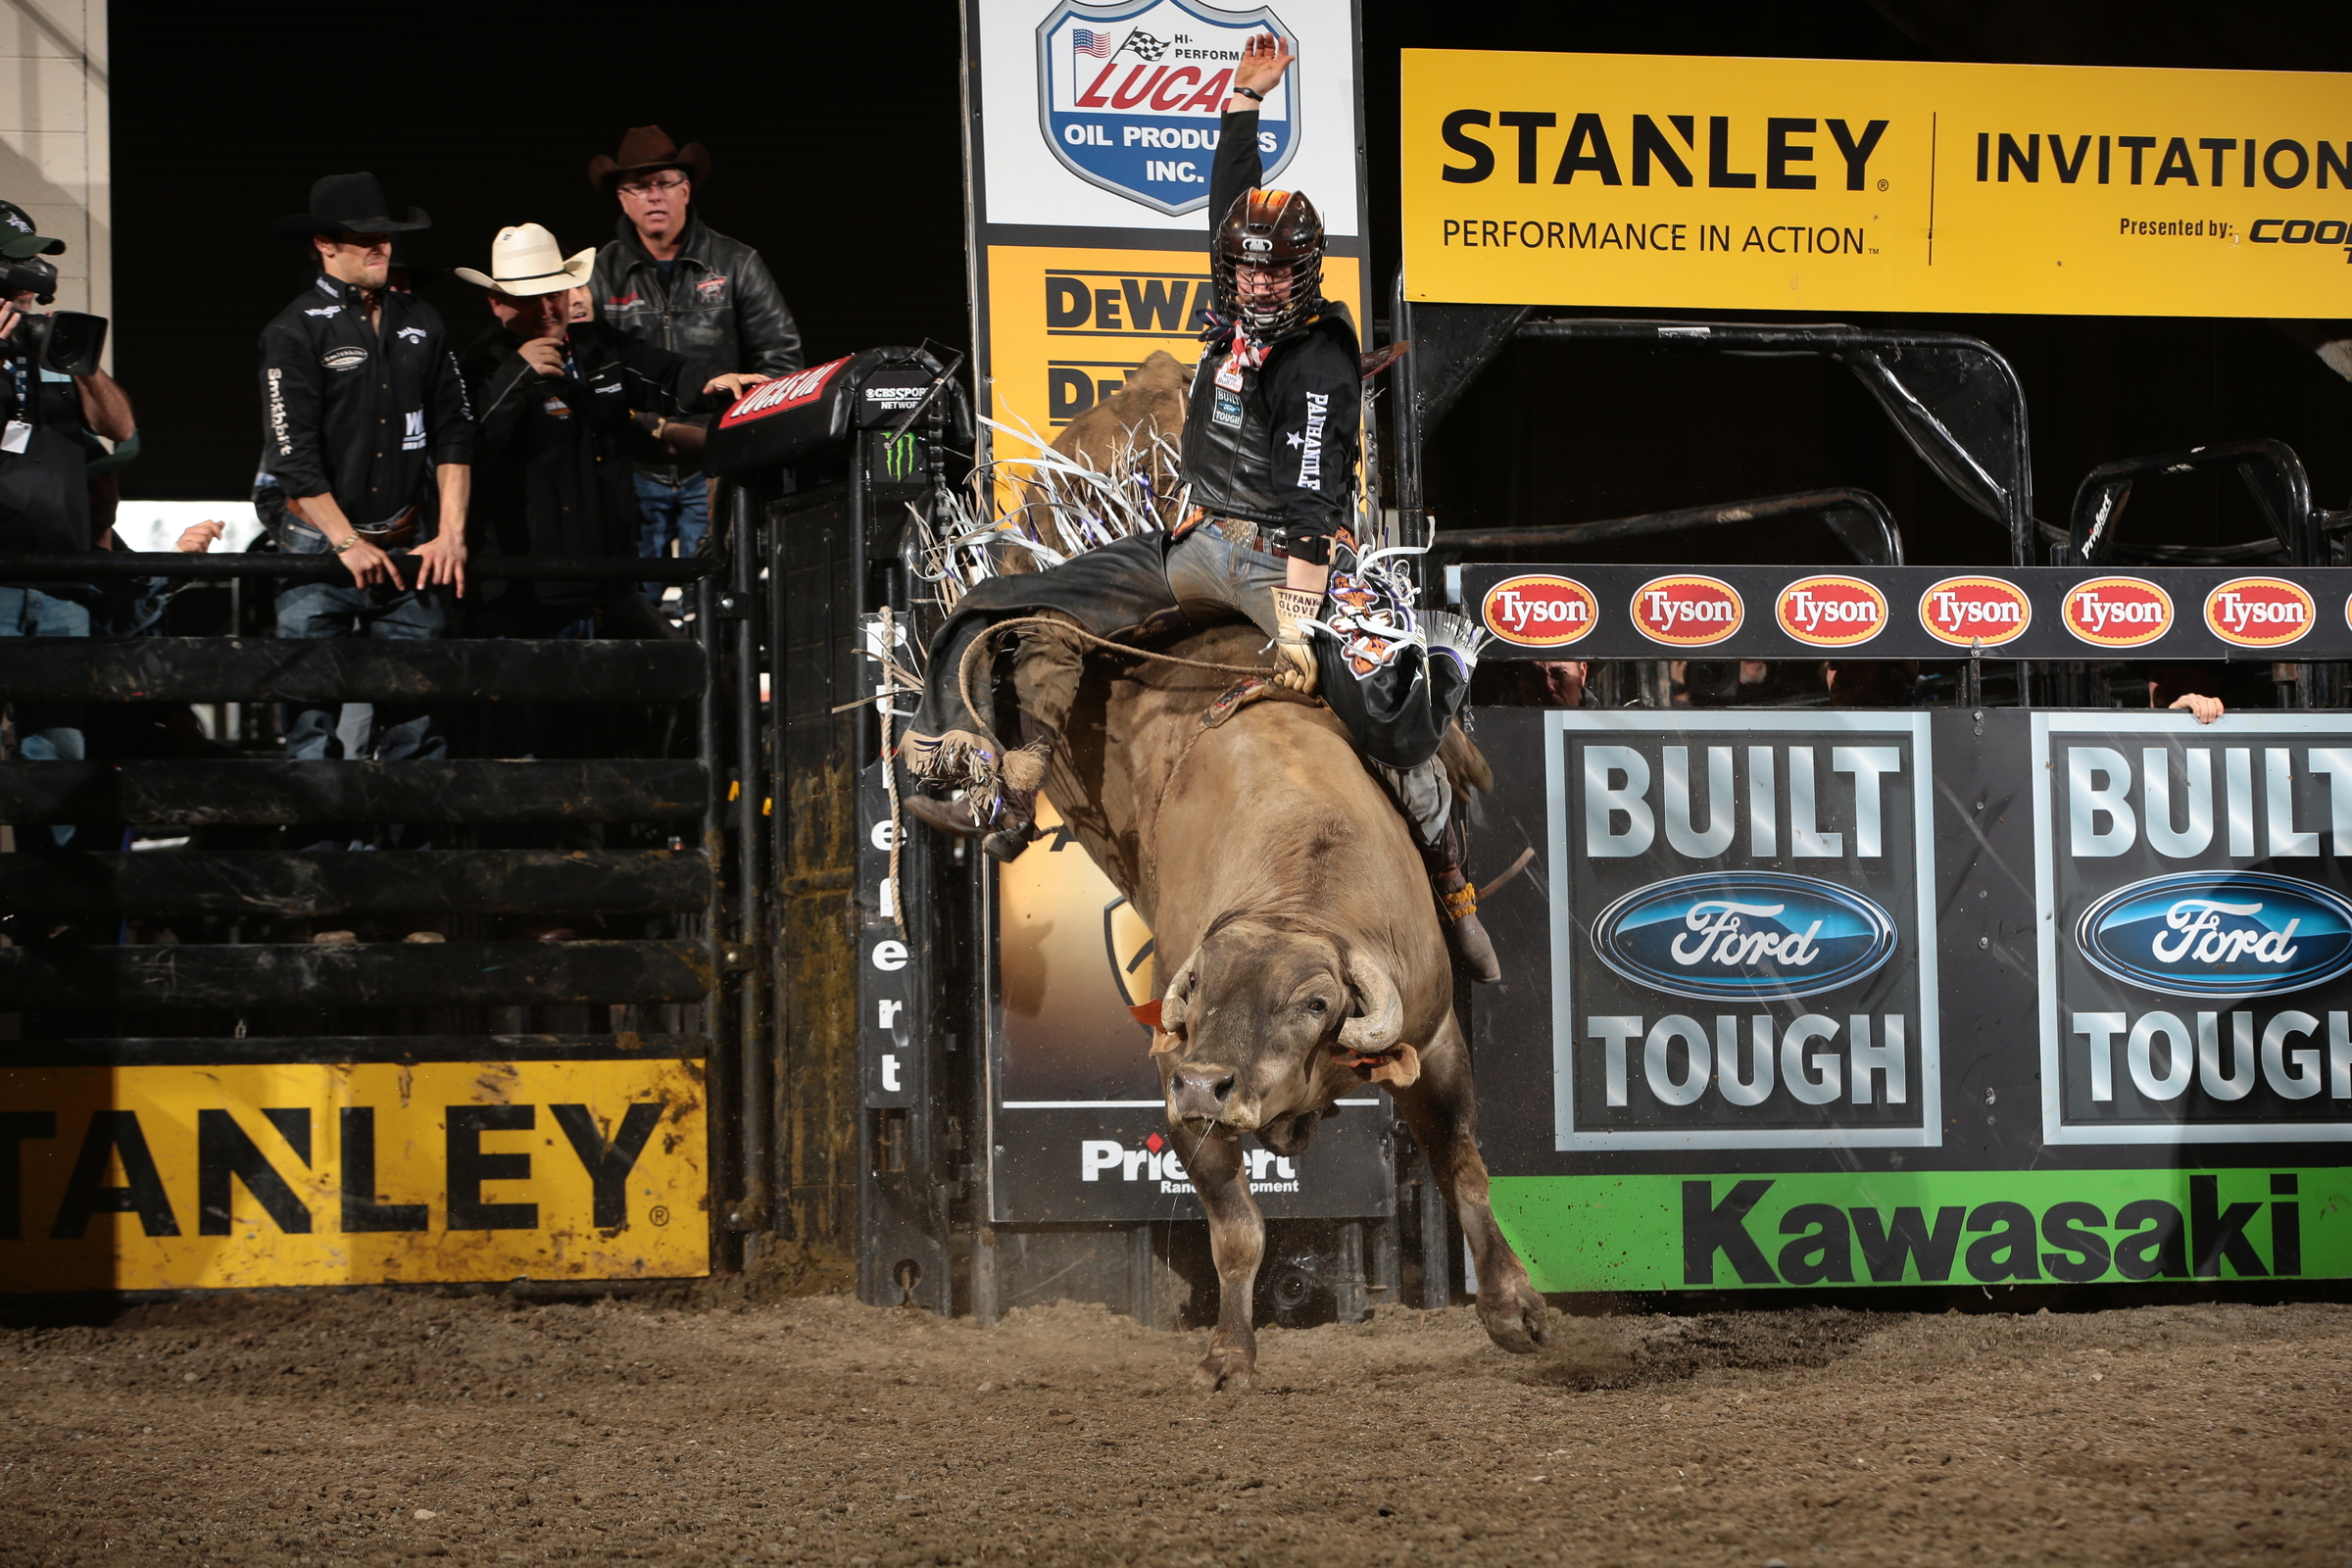 Cody Nance rides Dakota/Berger/Struve/Rosen's Smackdown for 88.5 during the Championship round of the Billings Built Ford Tough series PBR. Photo by Andy Watson